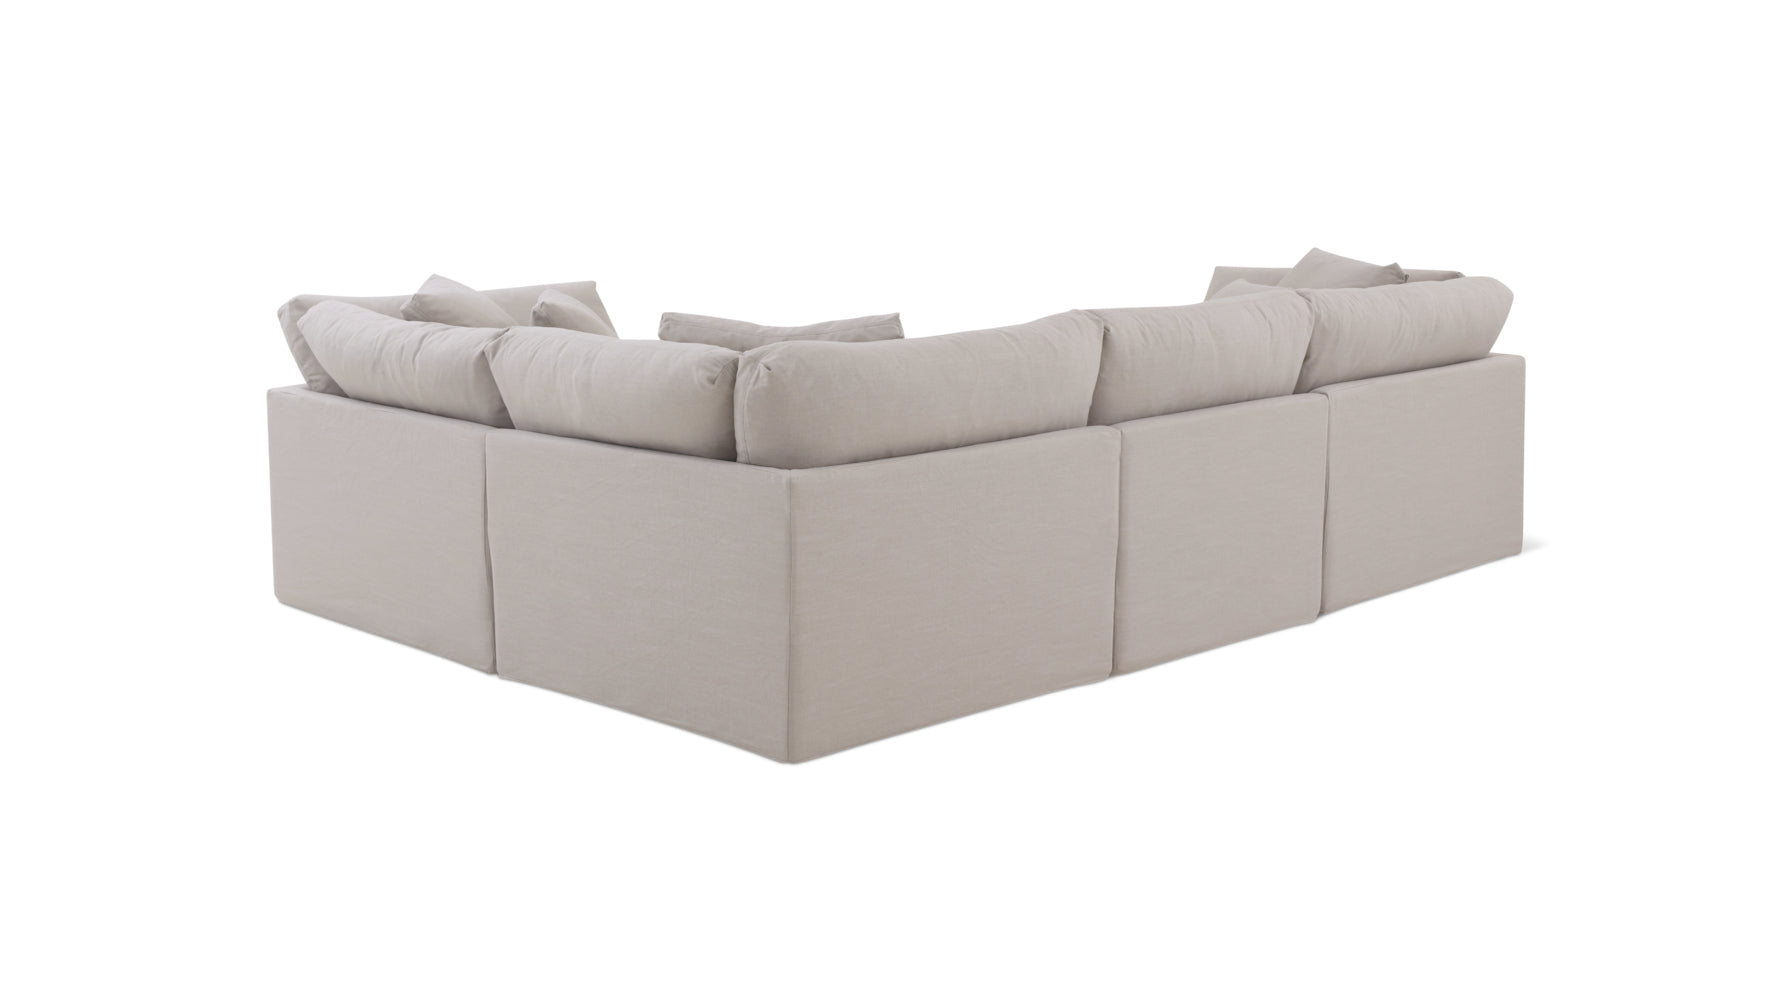 Get Together™ 4-Piece Modular Sectional Closed, Large, Clay - Image 9